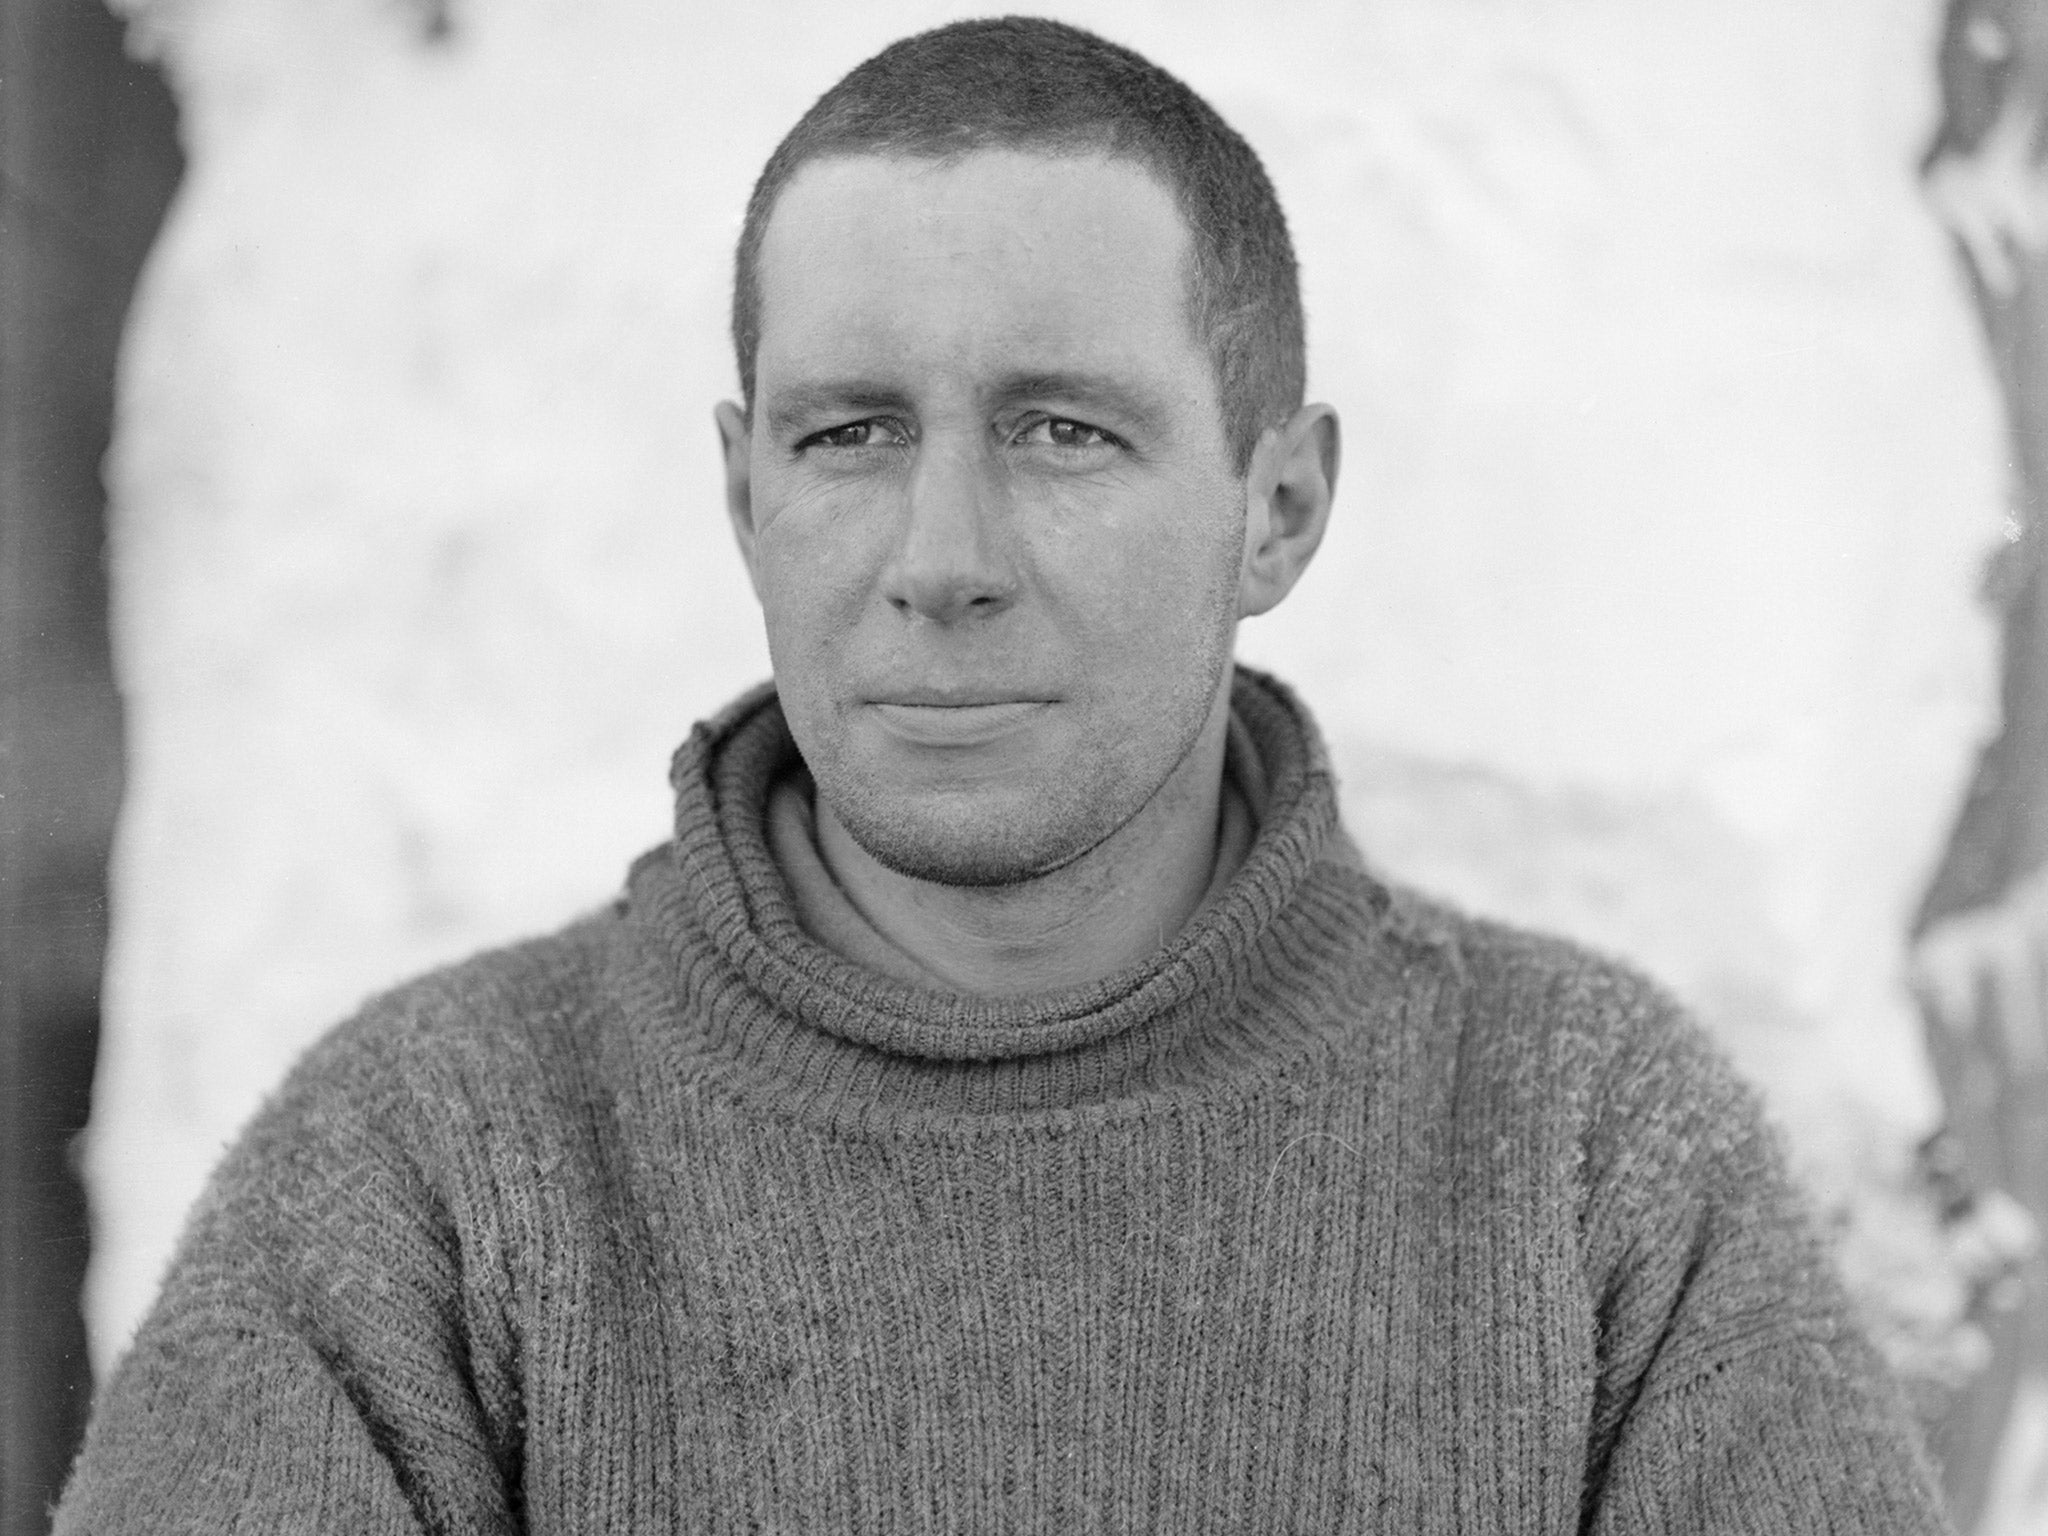 Lawrence Oates and his team sought the eggs of an emperor penguin